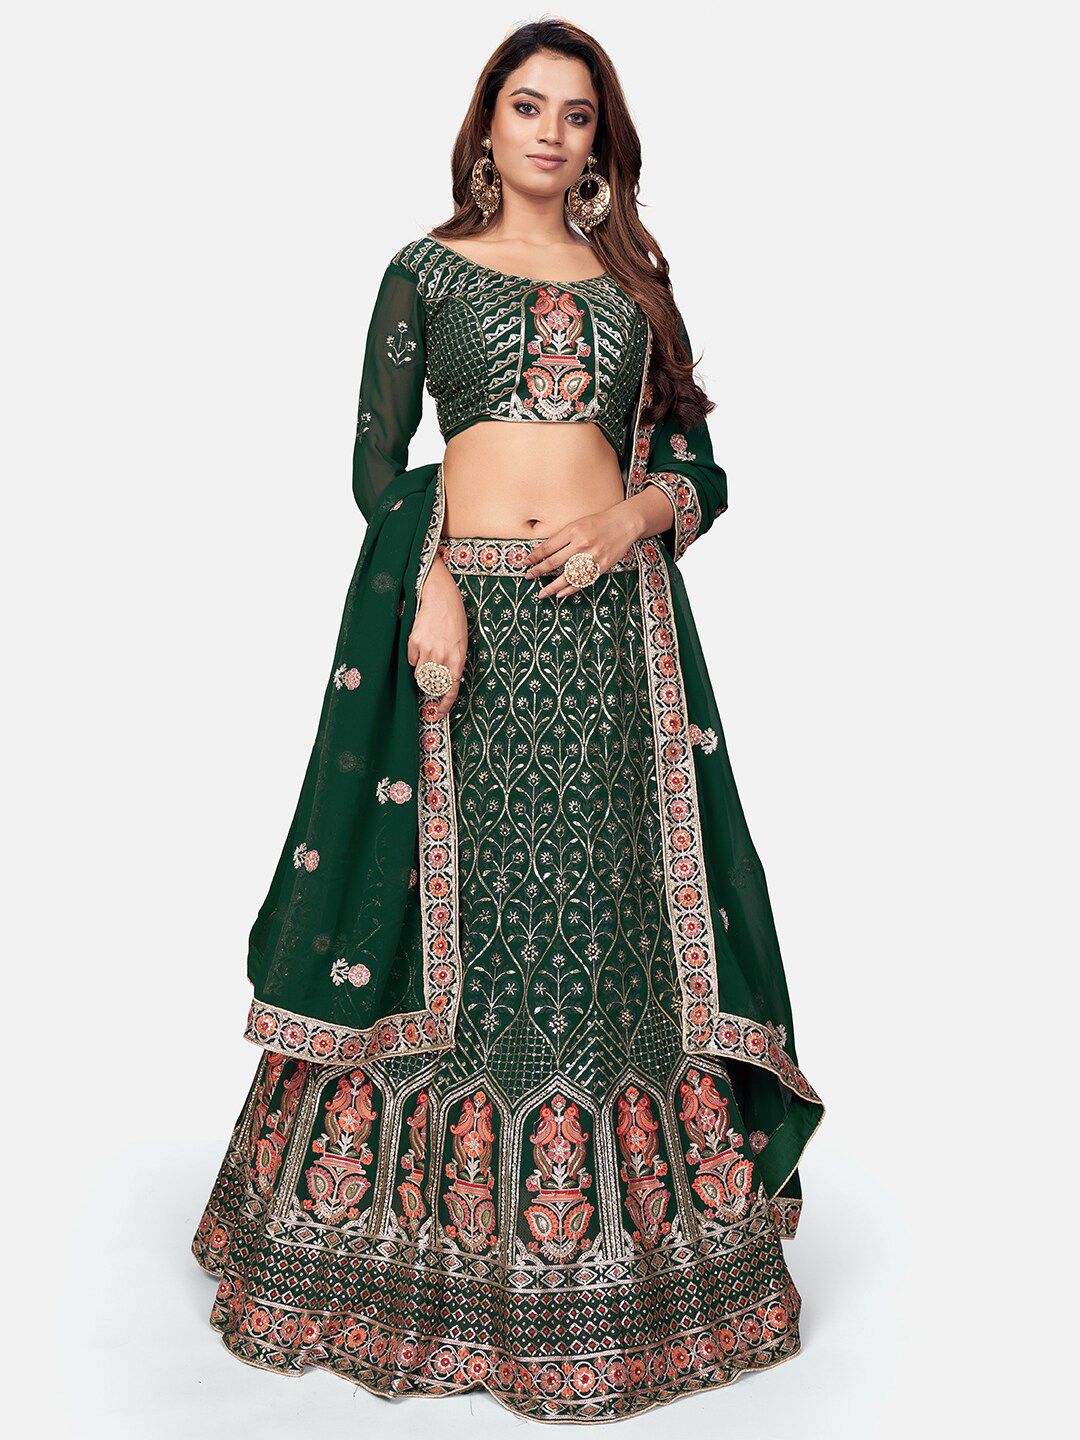 WHITE FIRE Green & Gold-Toned Embroidered Thread Work Semi-Stitched Lehenga & Unstitched Blouse With Dupatta Price in India